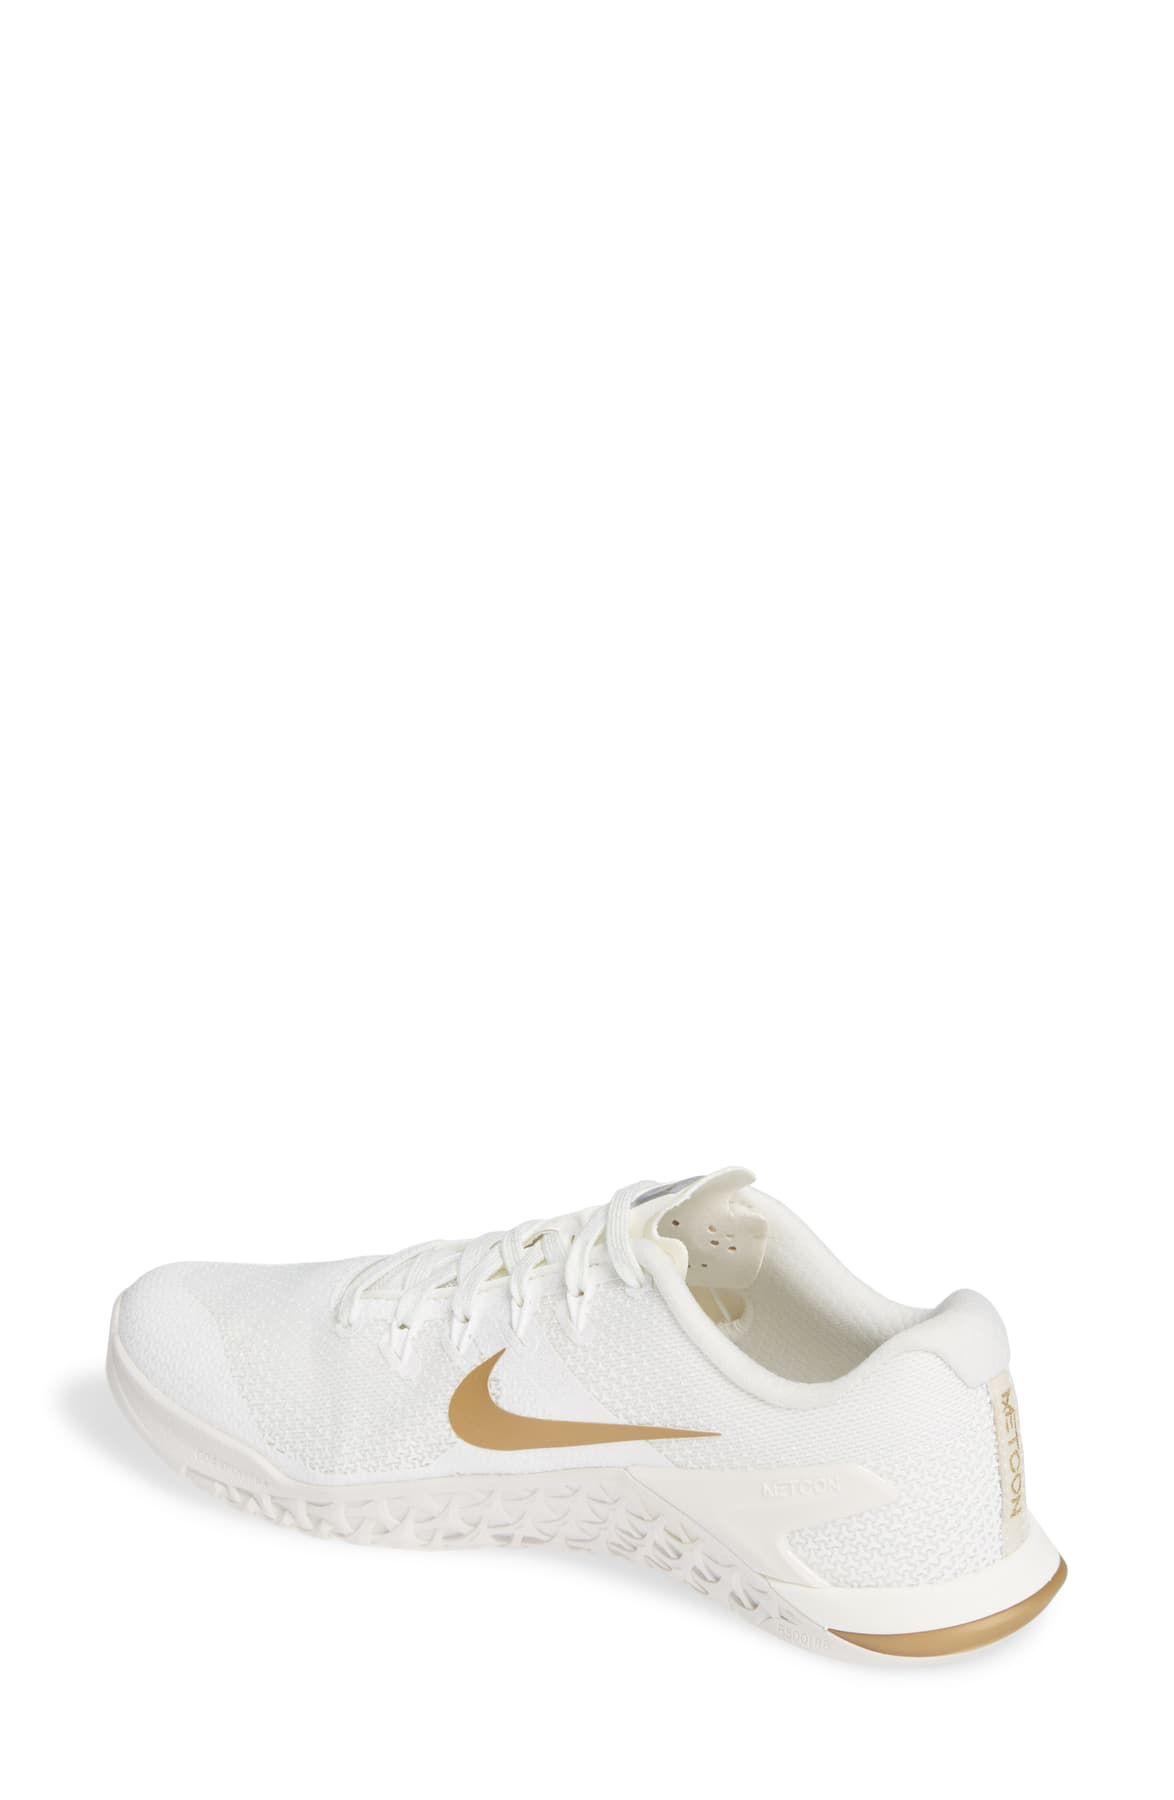 Nike Metcon 4 Champagne Trainers in White - Lyst